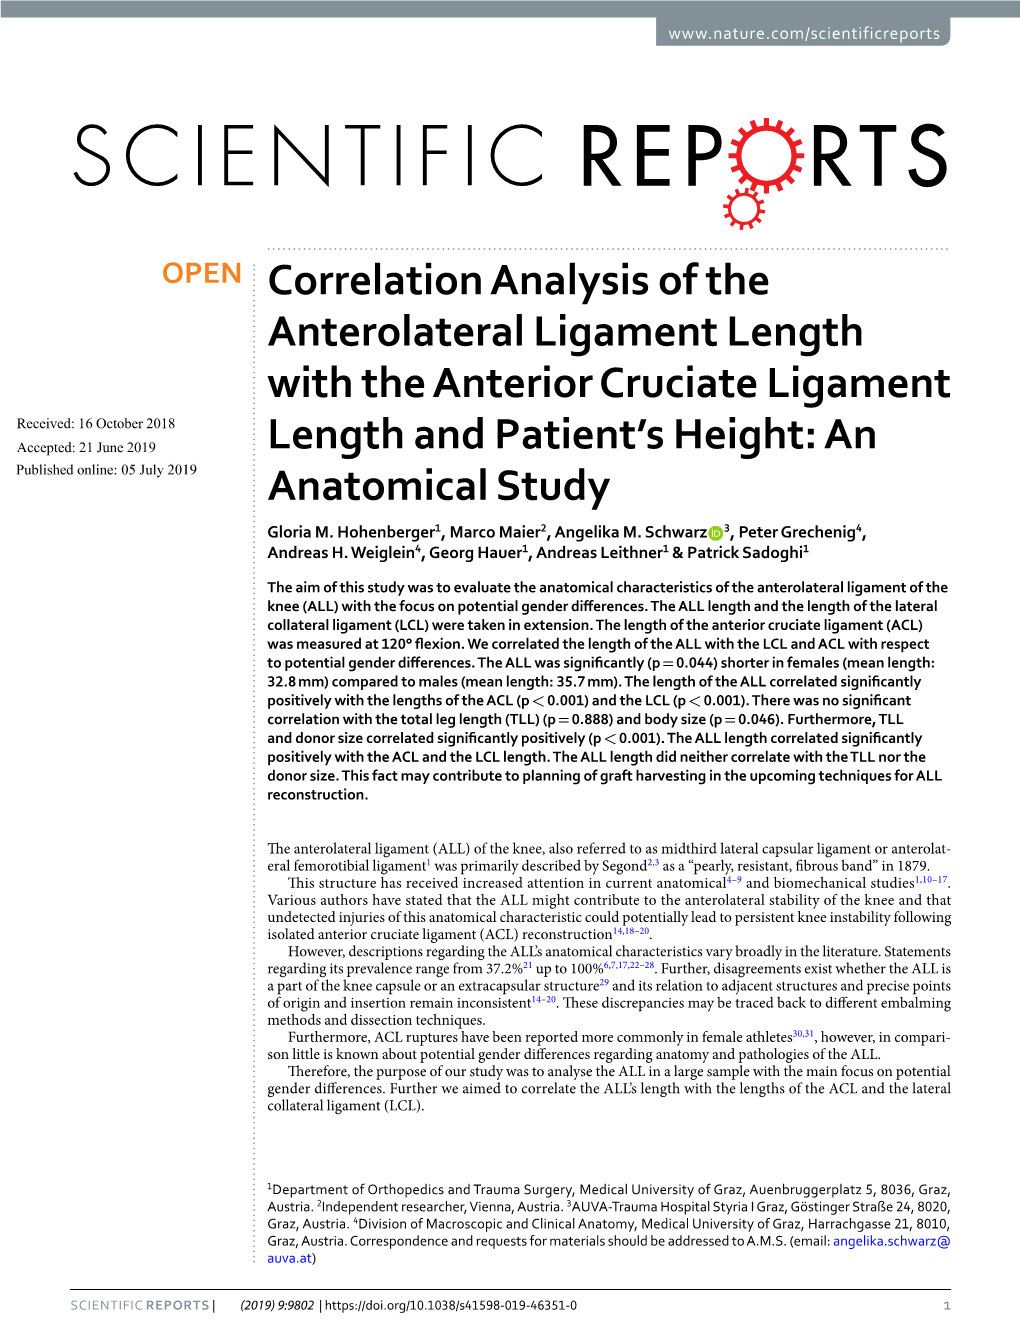 Correlation Analysis of the Anterolateral Ligament Length With